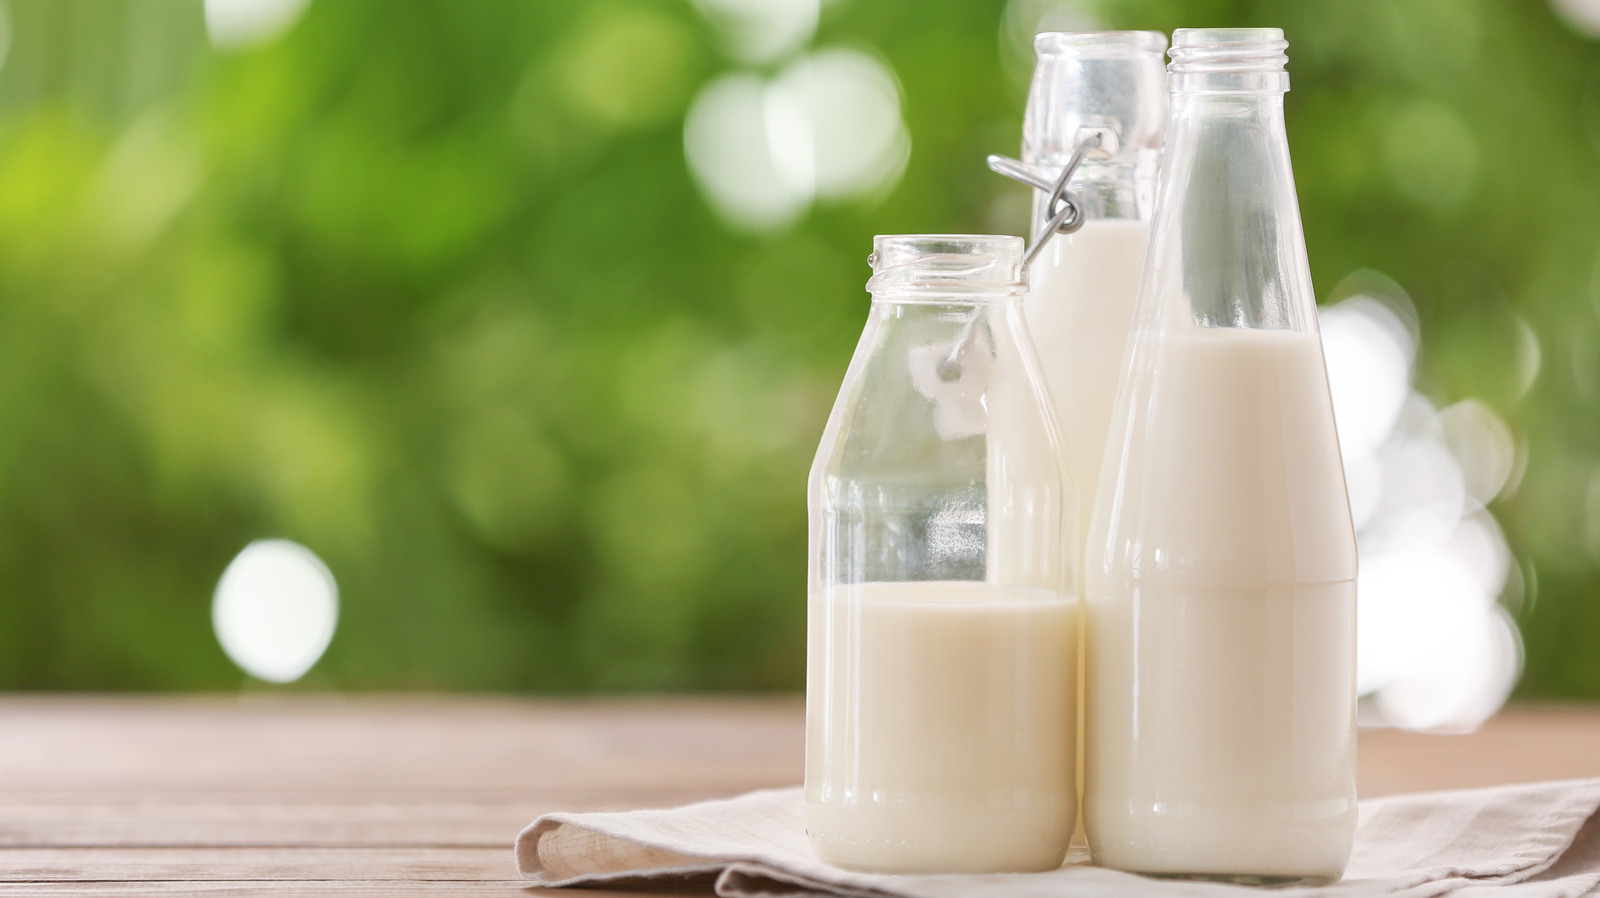 https://www.mashed.com/img/gallery/read-this-before-you-buy-glass-milk-bottles-at-whole-foods/l-intro-1663781066.jpg